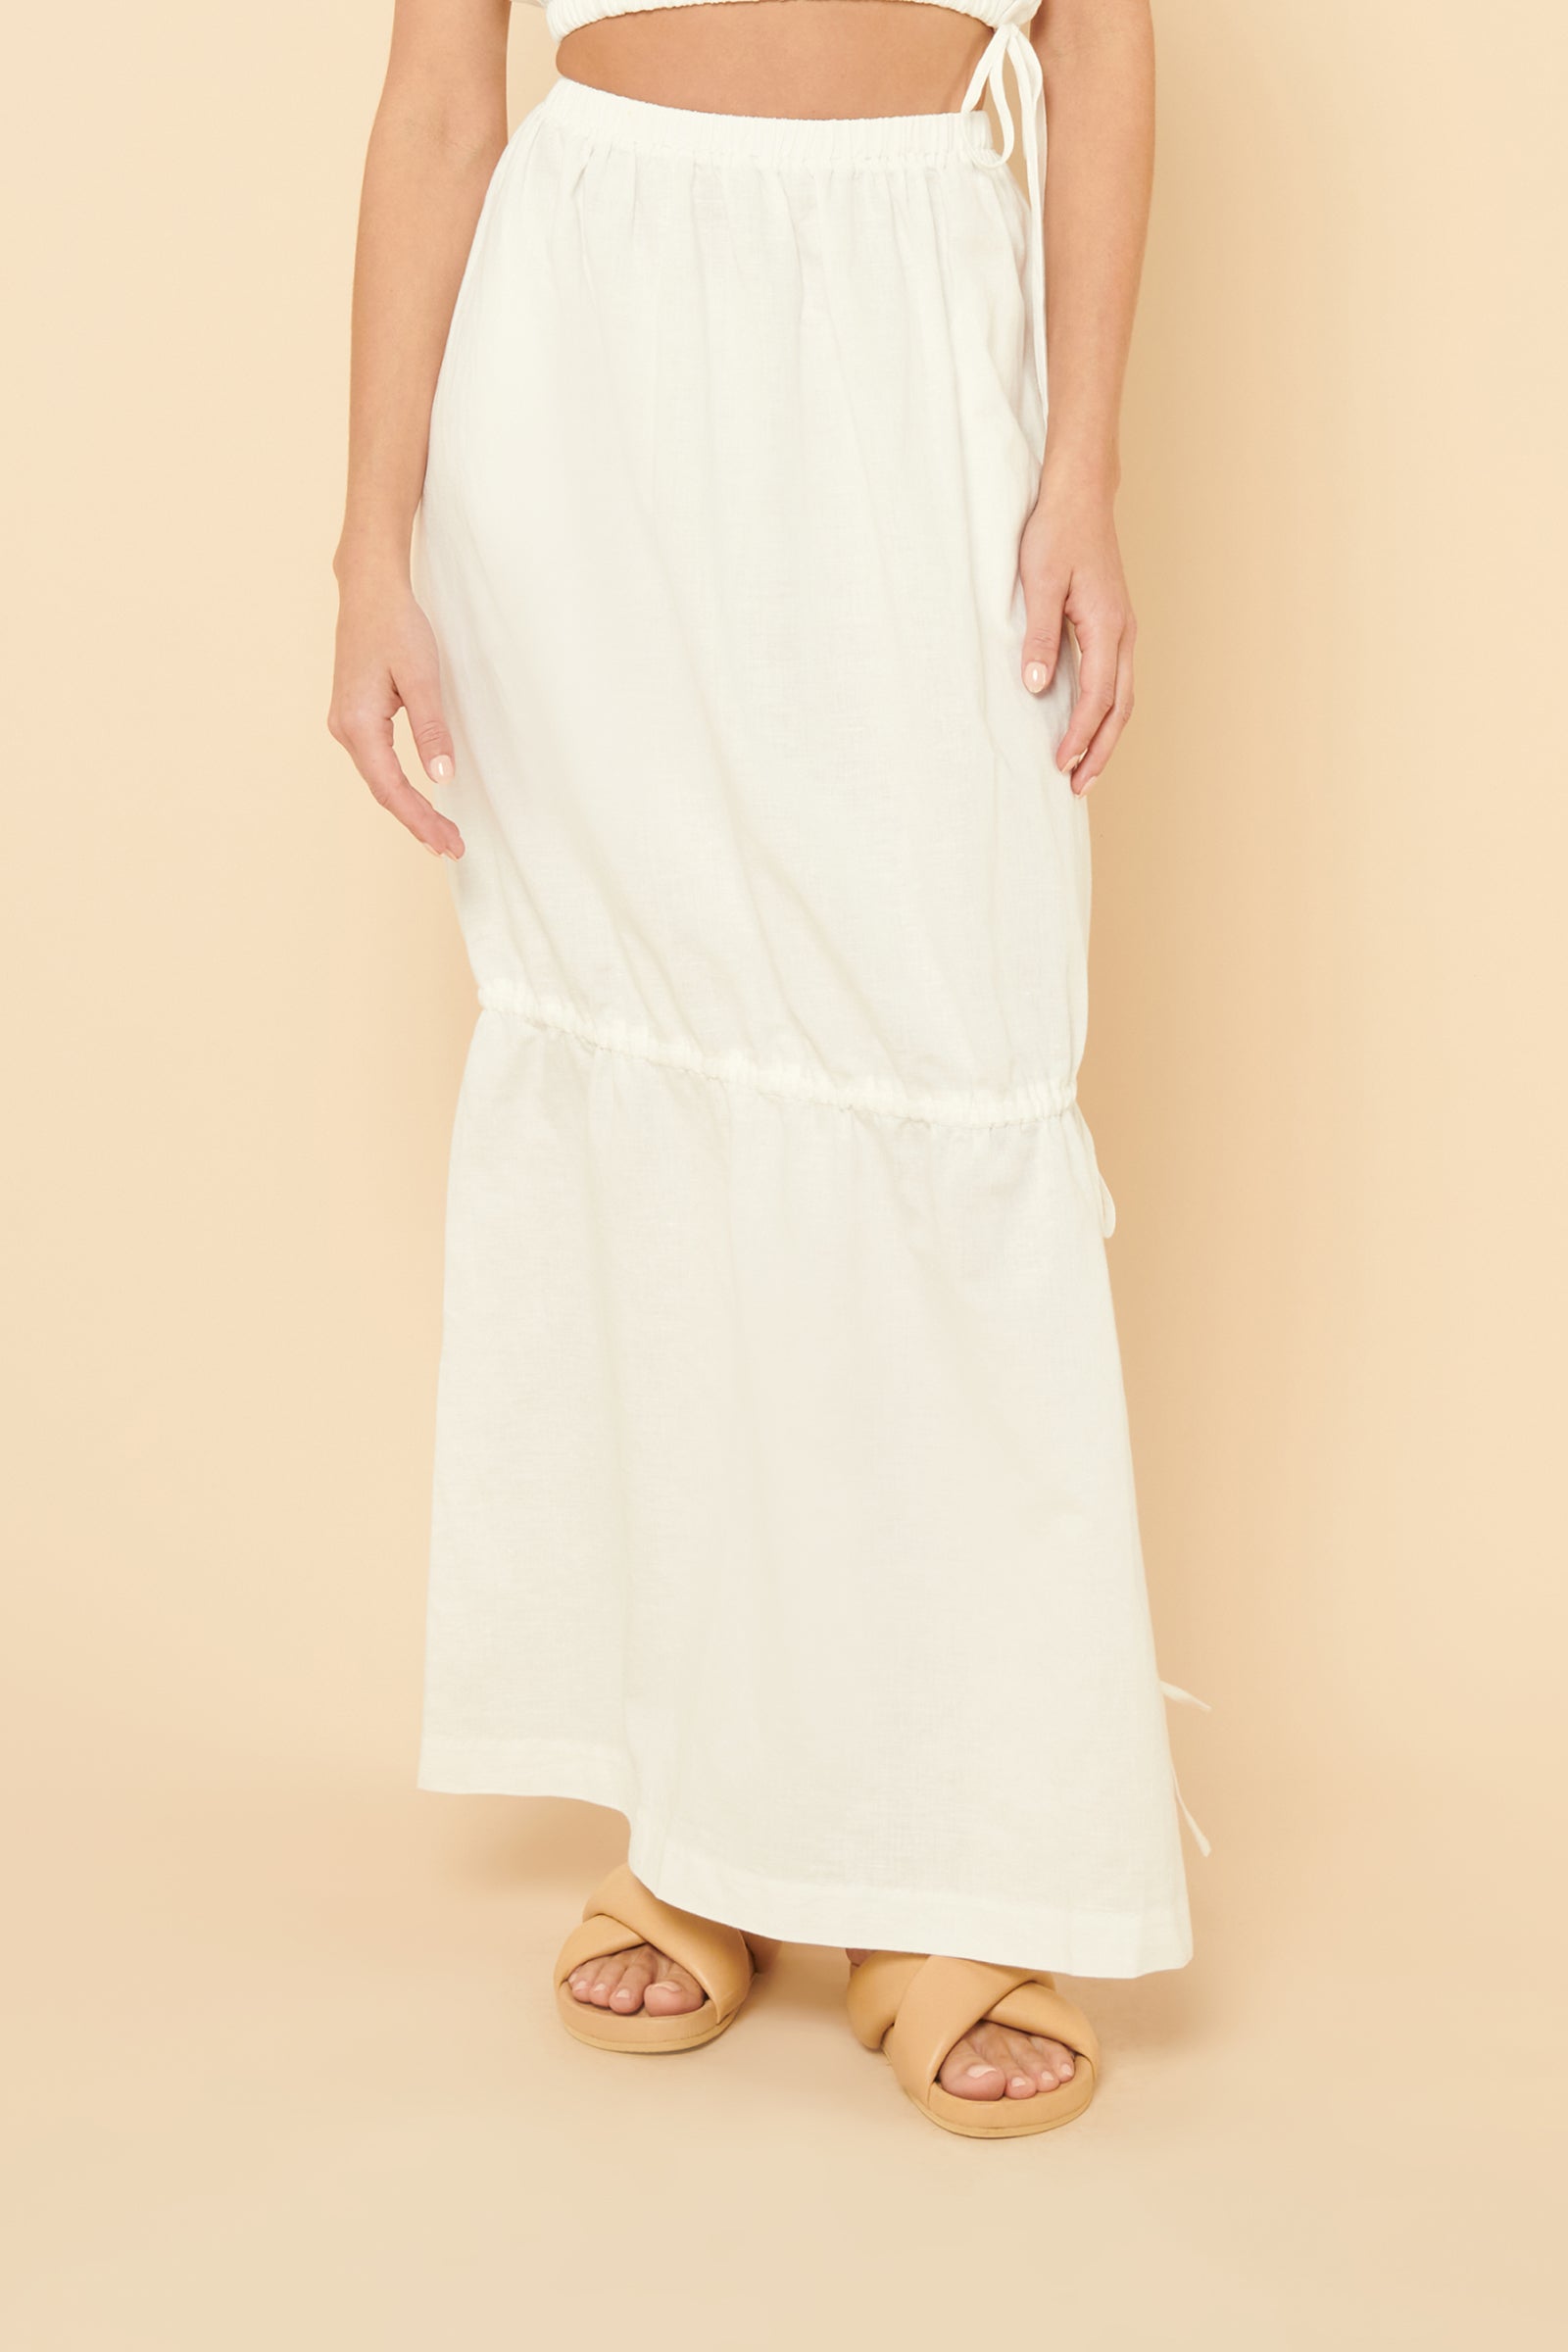 Nude Lucy Brea Linen Maxi Skirt in White